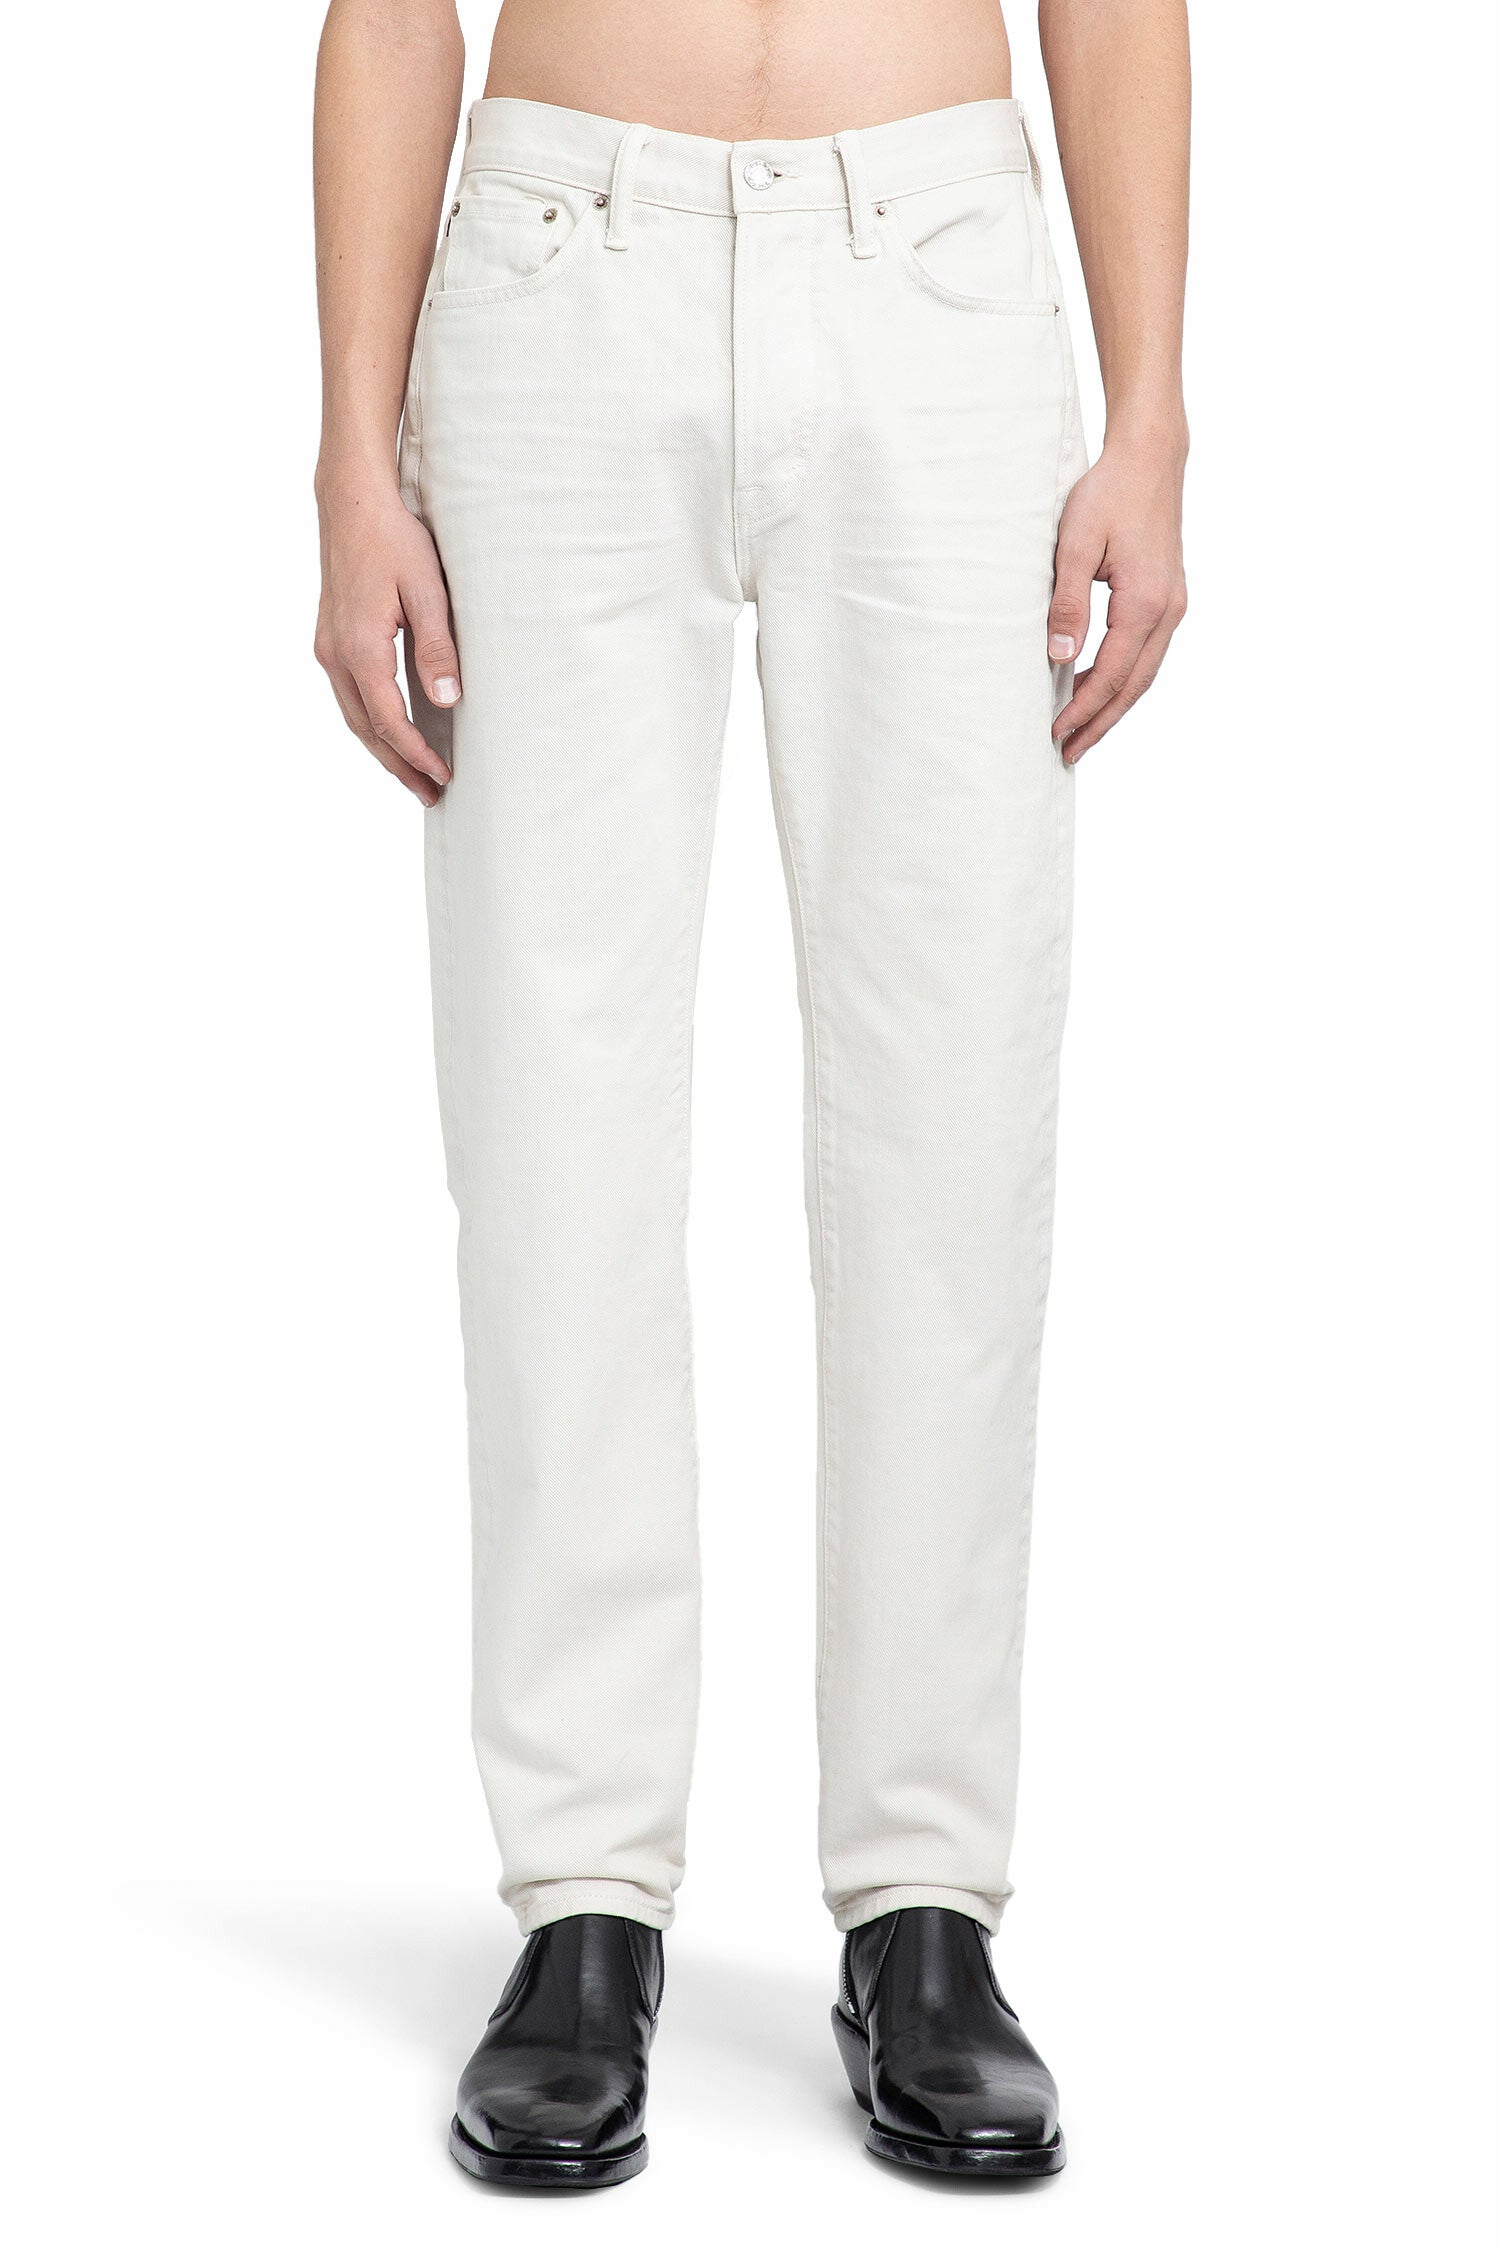 TOM FORD MAN OFF-WHITE JEANS